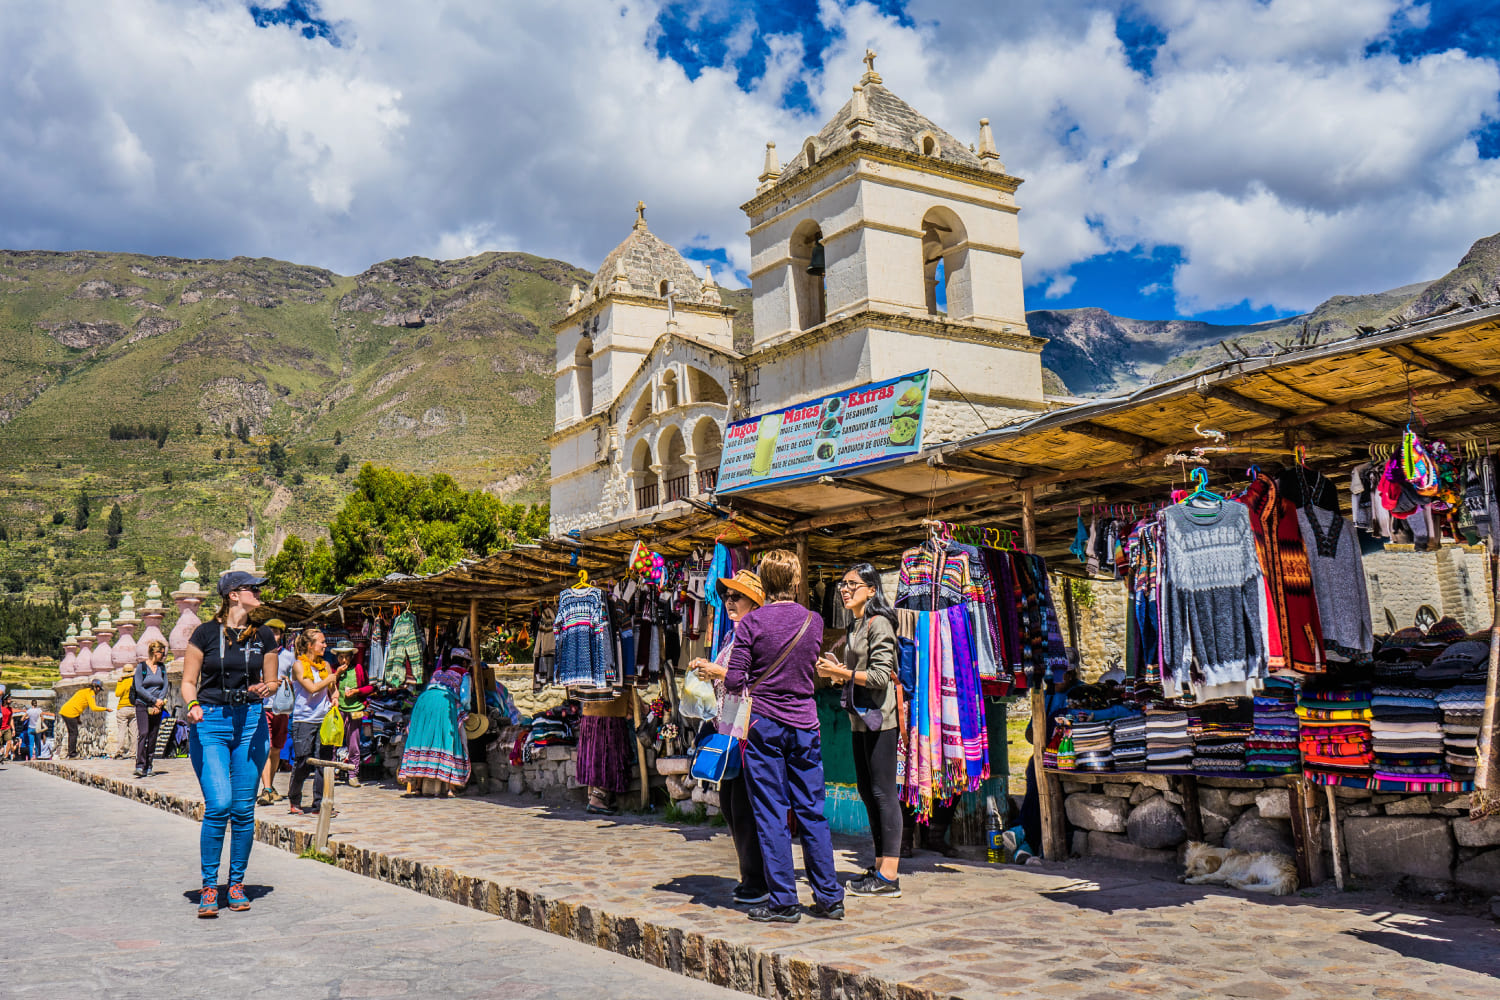 THE VILLAGES OF THE COLCA CANYON